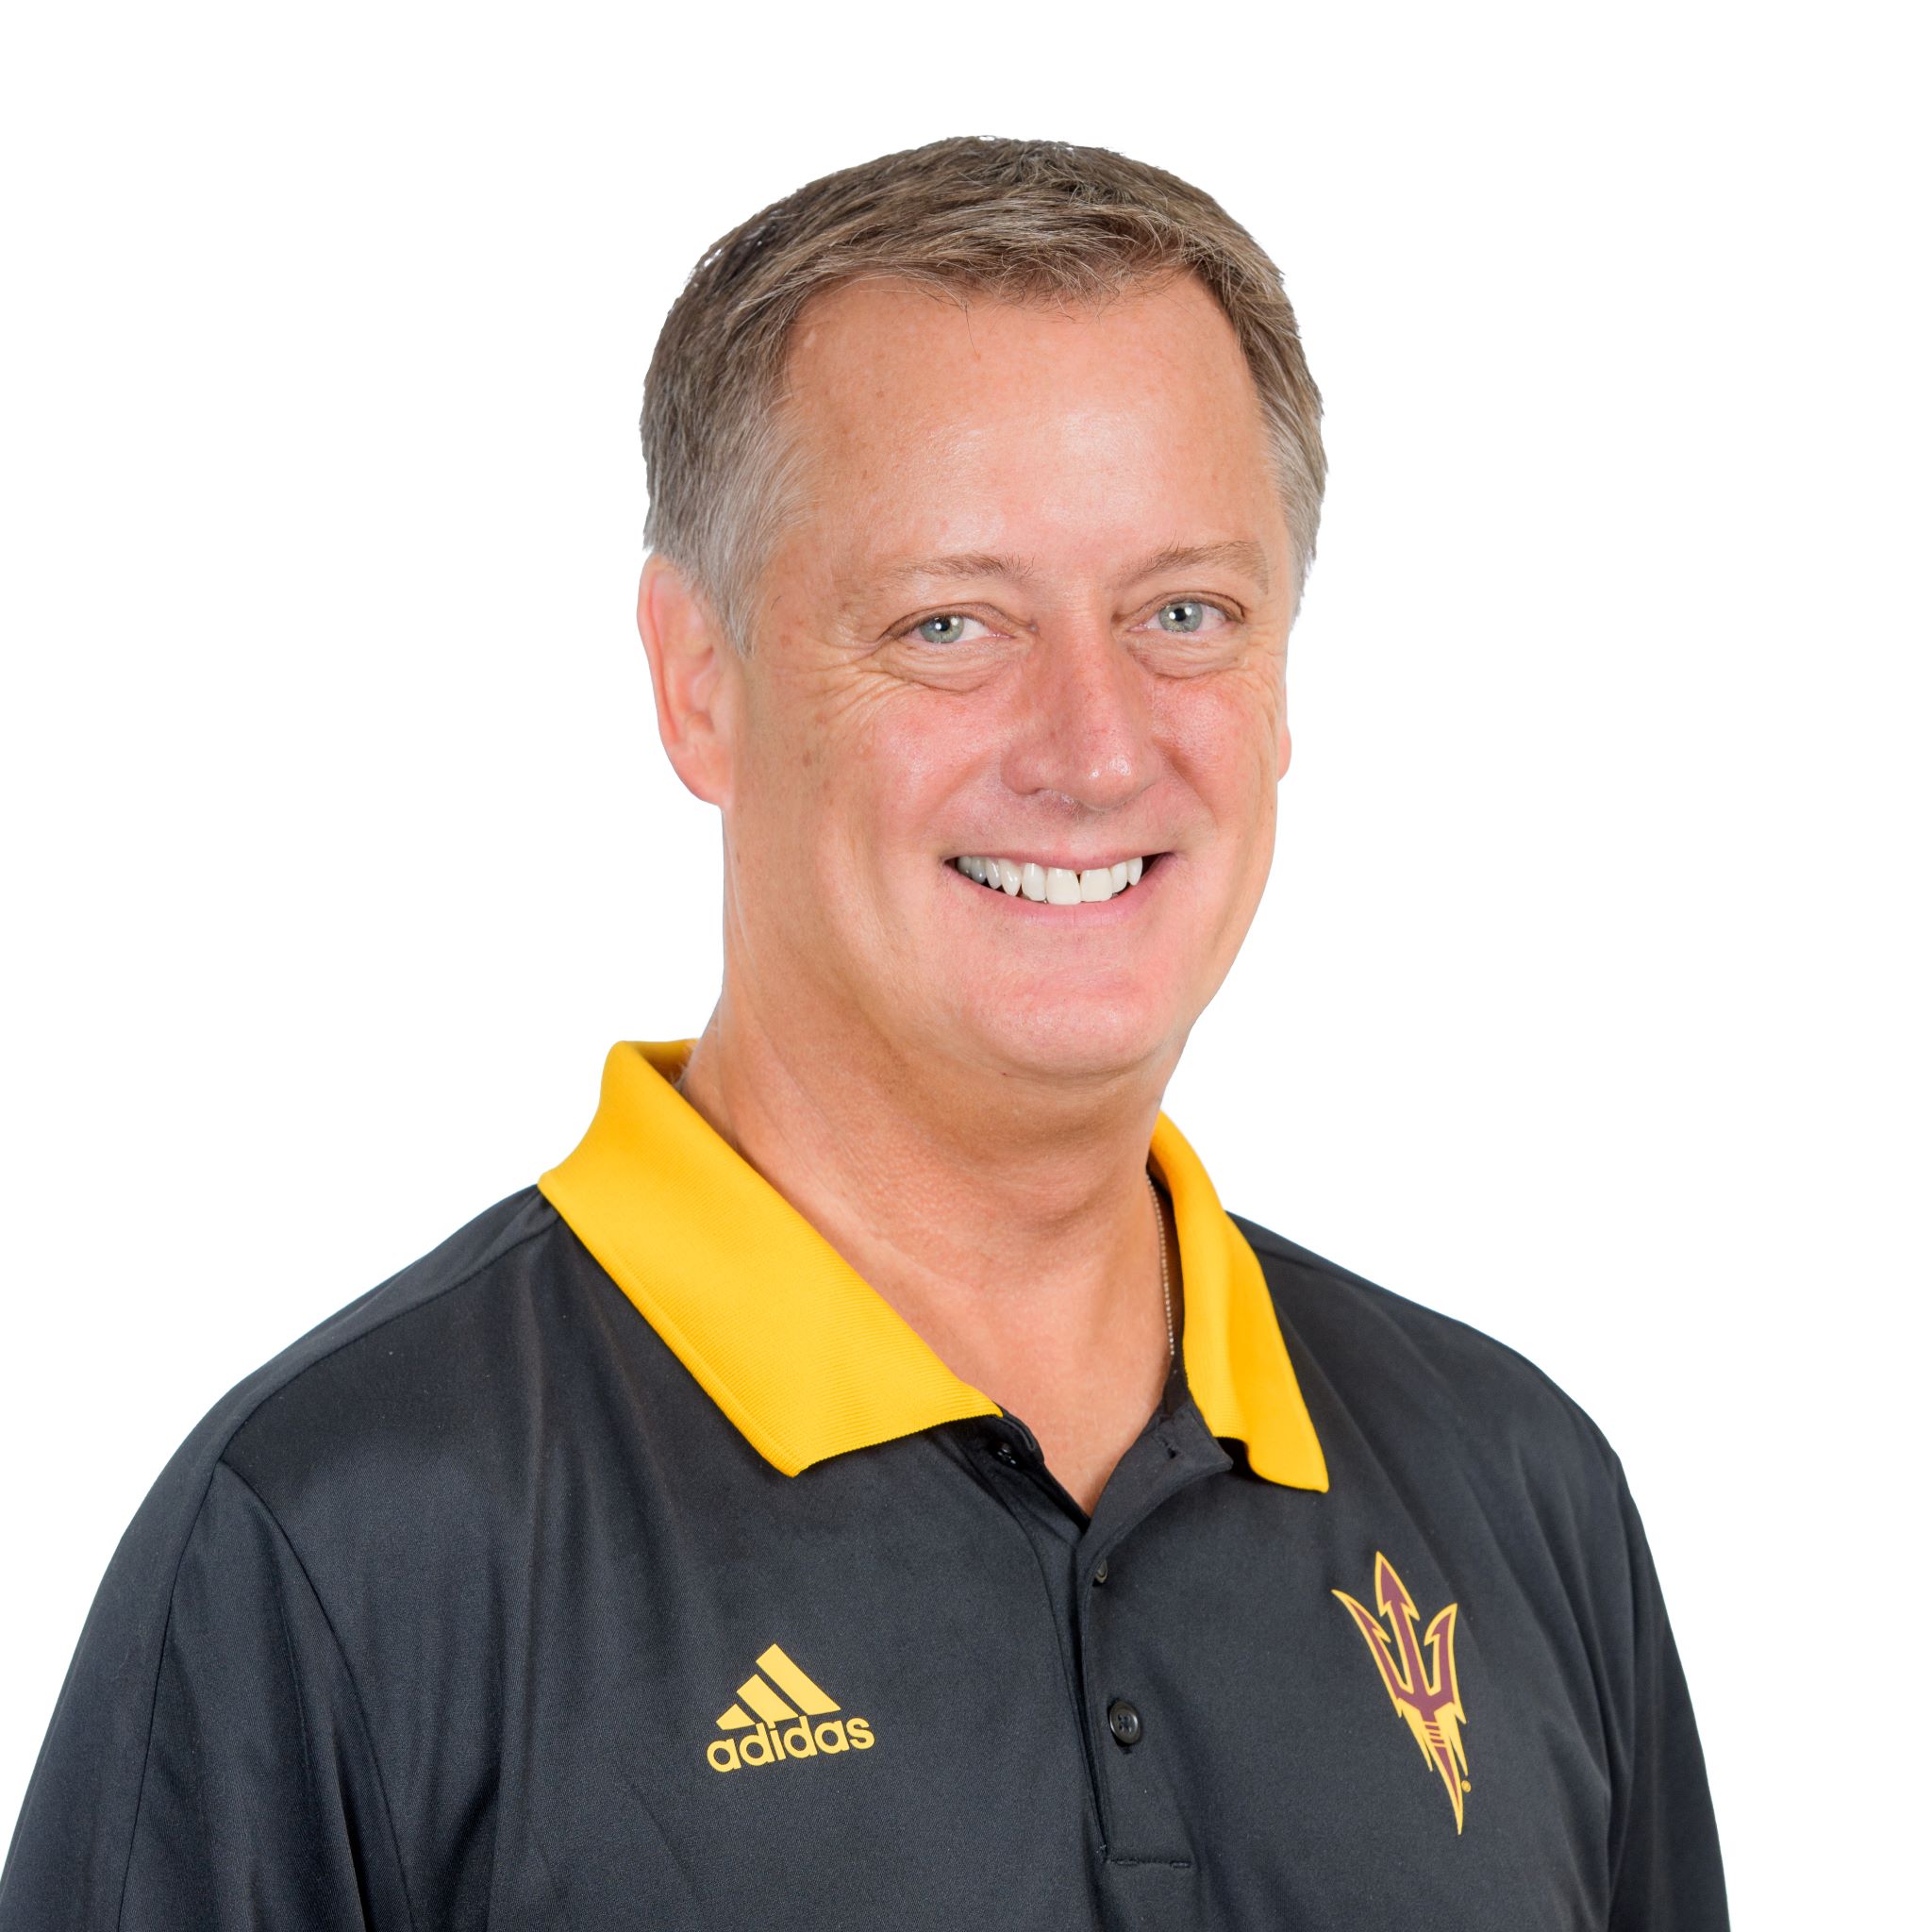 Rick Dircks, ’82 BS, served as chair of the ASU Alumni Association Board of Directors and the National Alumni Council during the 2019-2020 fiscal year and then moved on to serve as the past chair for the 2020-2021 fiscal year. 